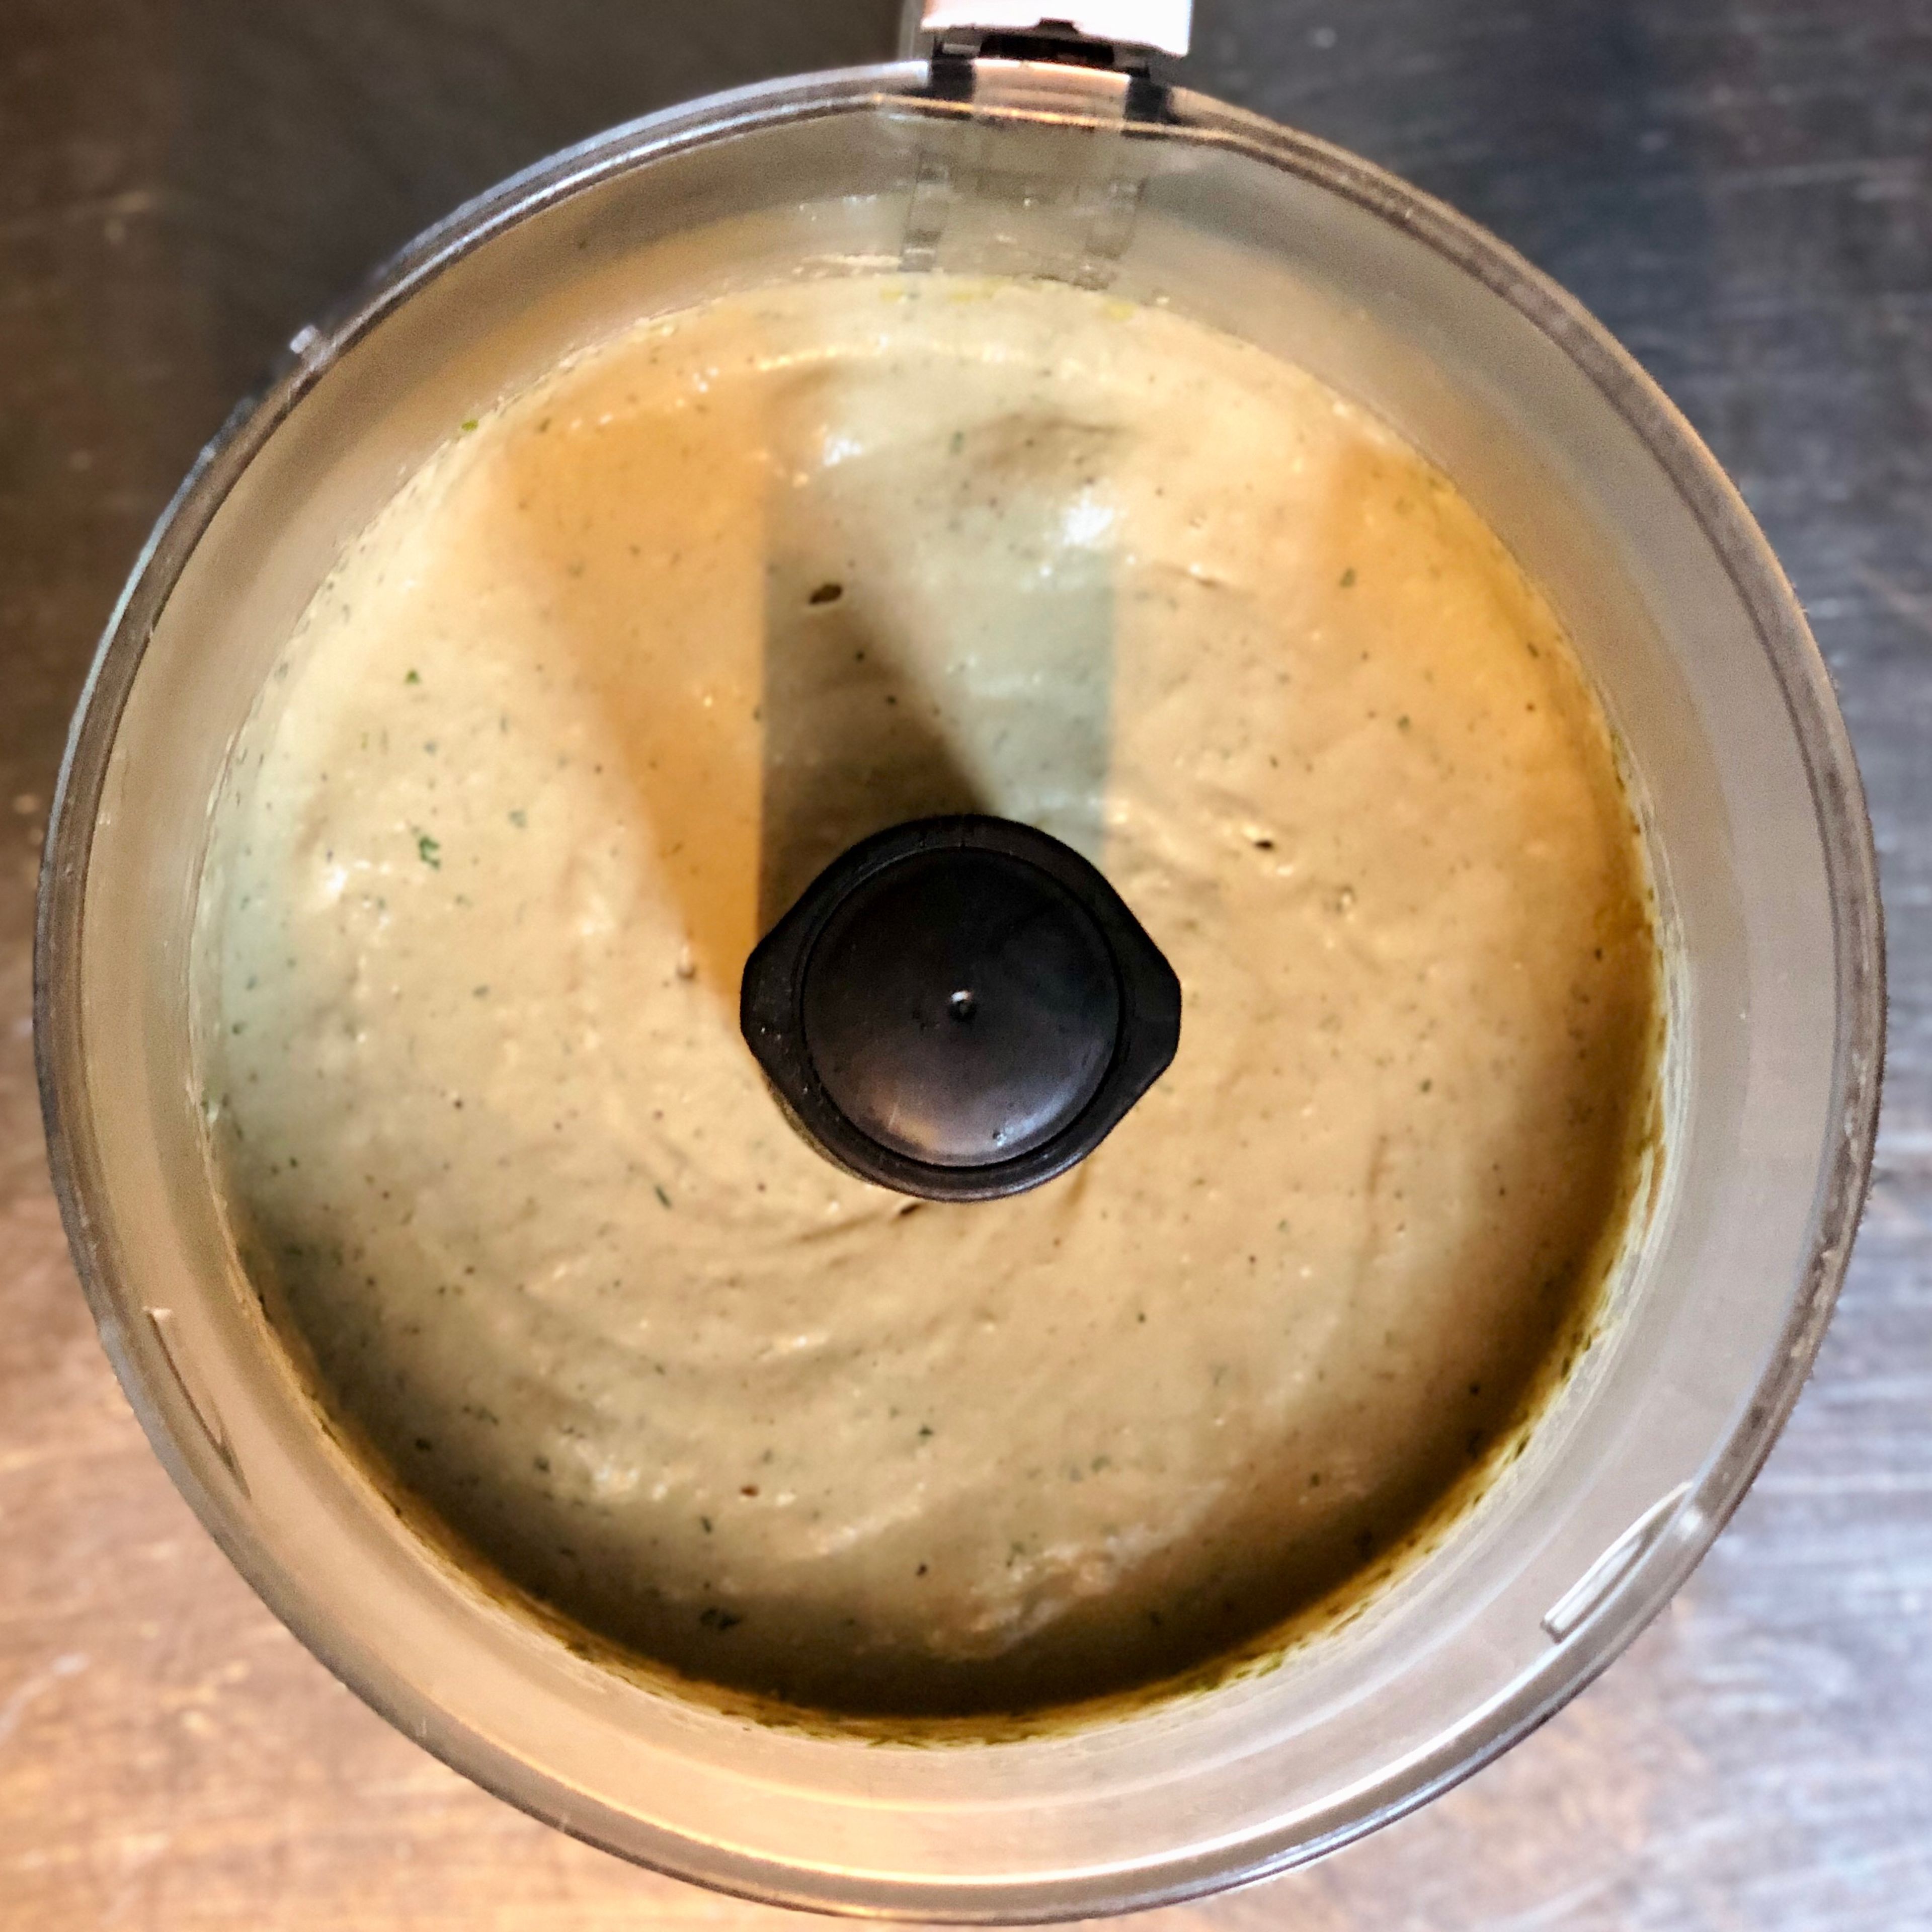 Place the flesh of the eggplants in a food processor or blender. Add lemon juice, tahini, garlic cloves , olive oil, pomegranate molasses, parsley, salt and pepper . Blend for 1-2 minutes until the mixture is smooth and creamy. Garnish with parsley olive oil and pomegranate seeds. Enjoy!